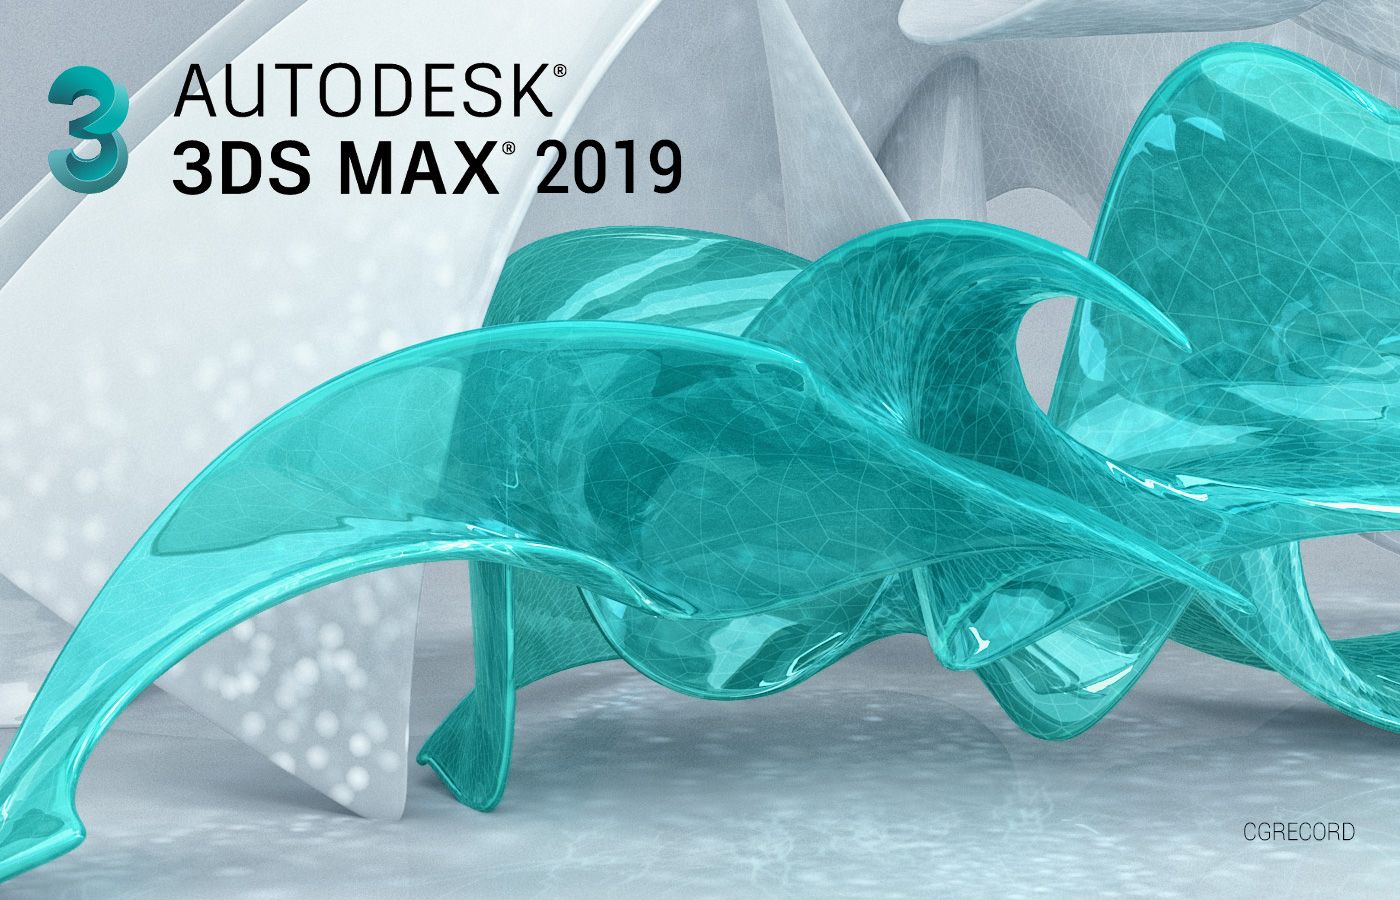 3ds max student license